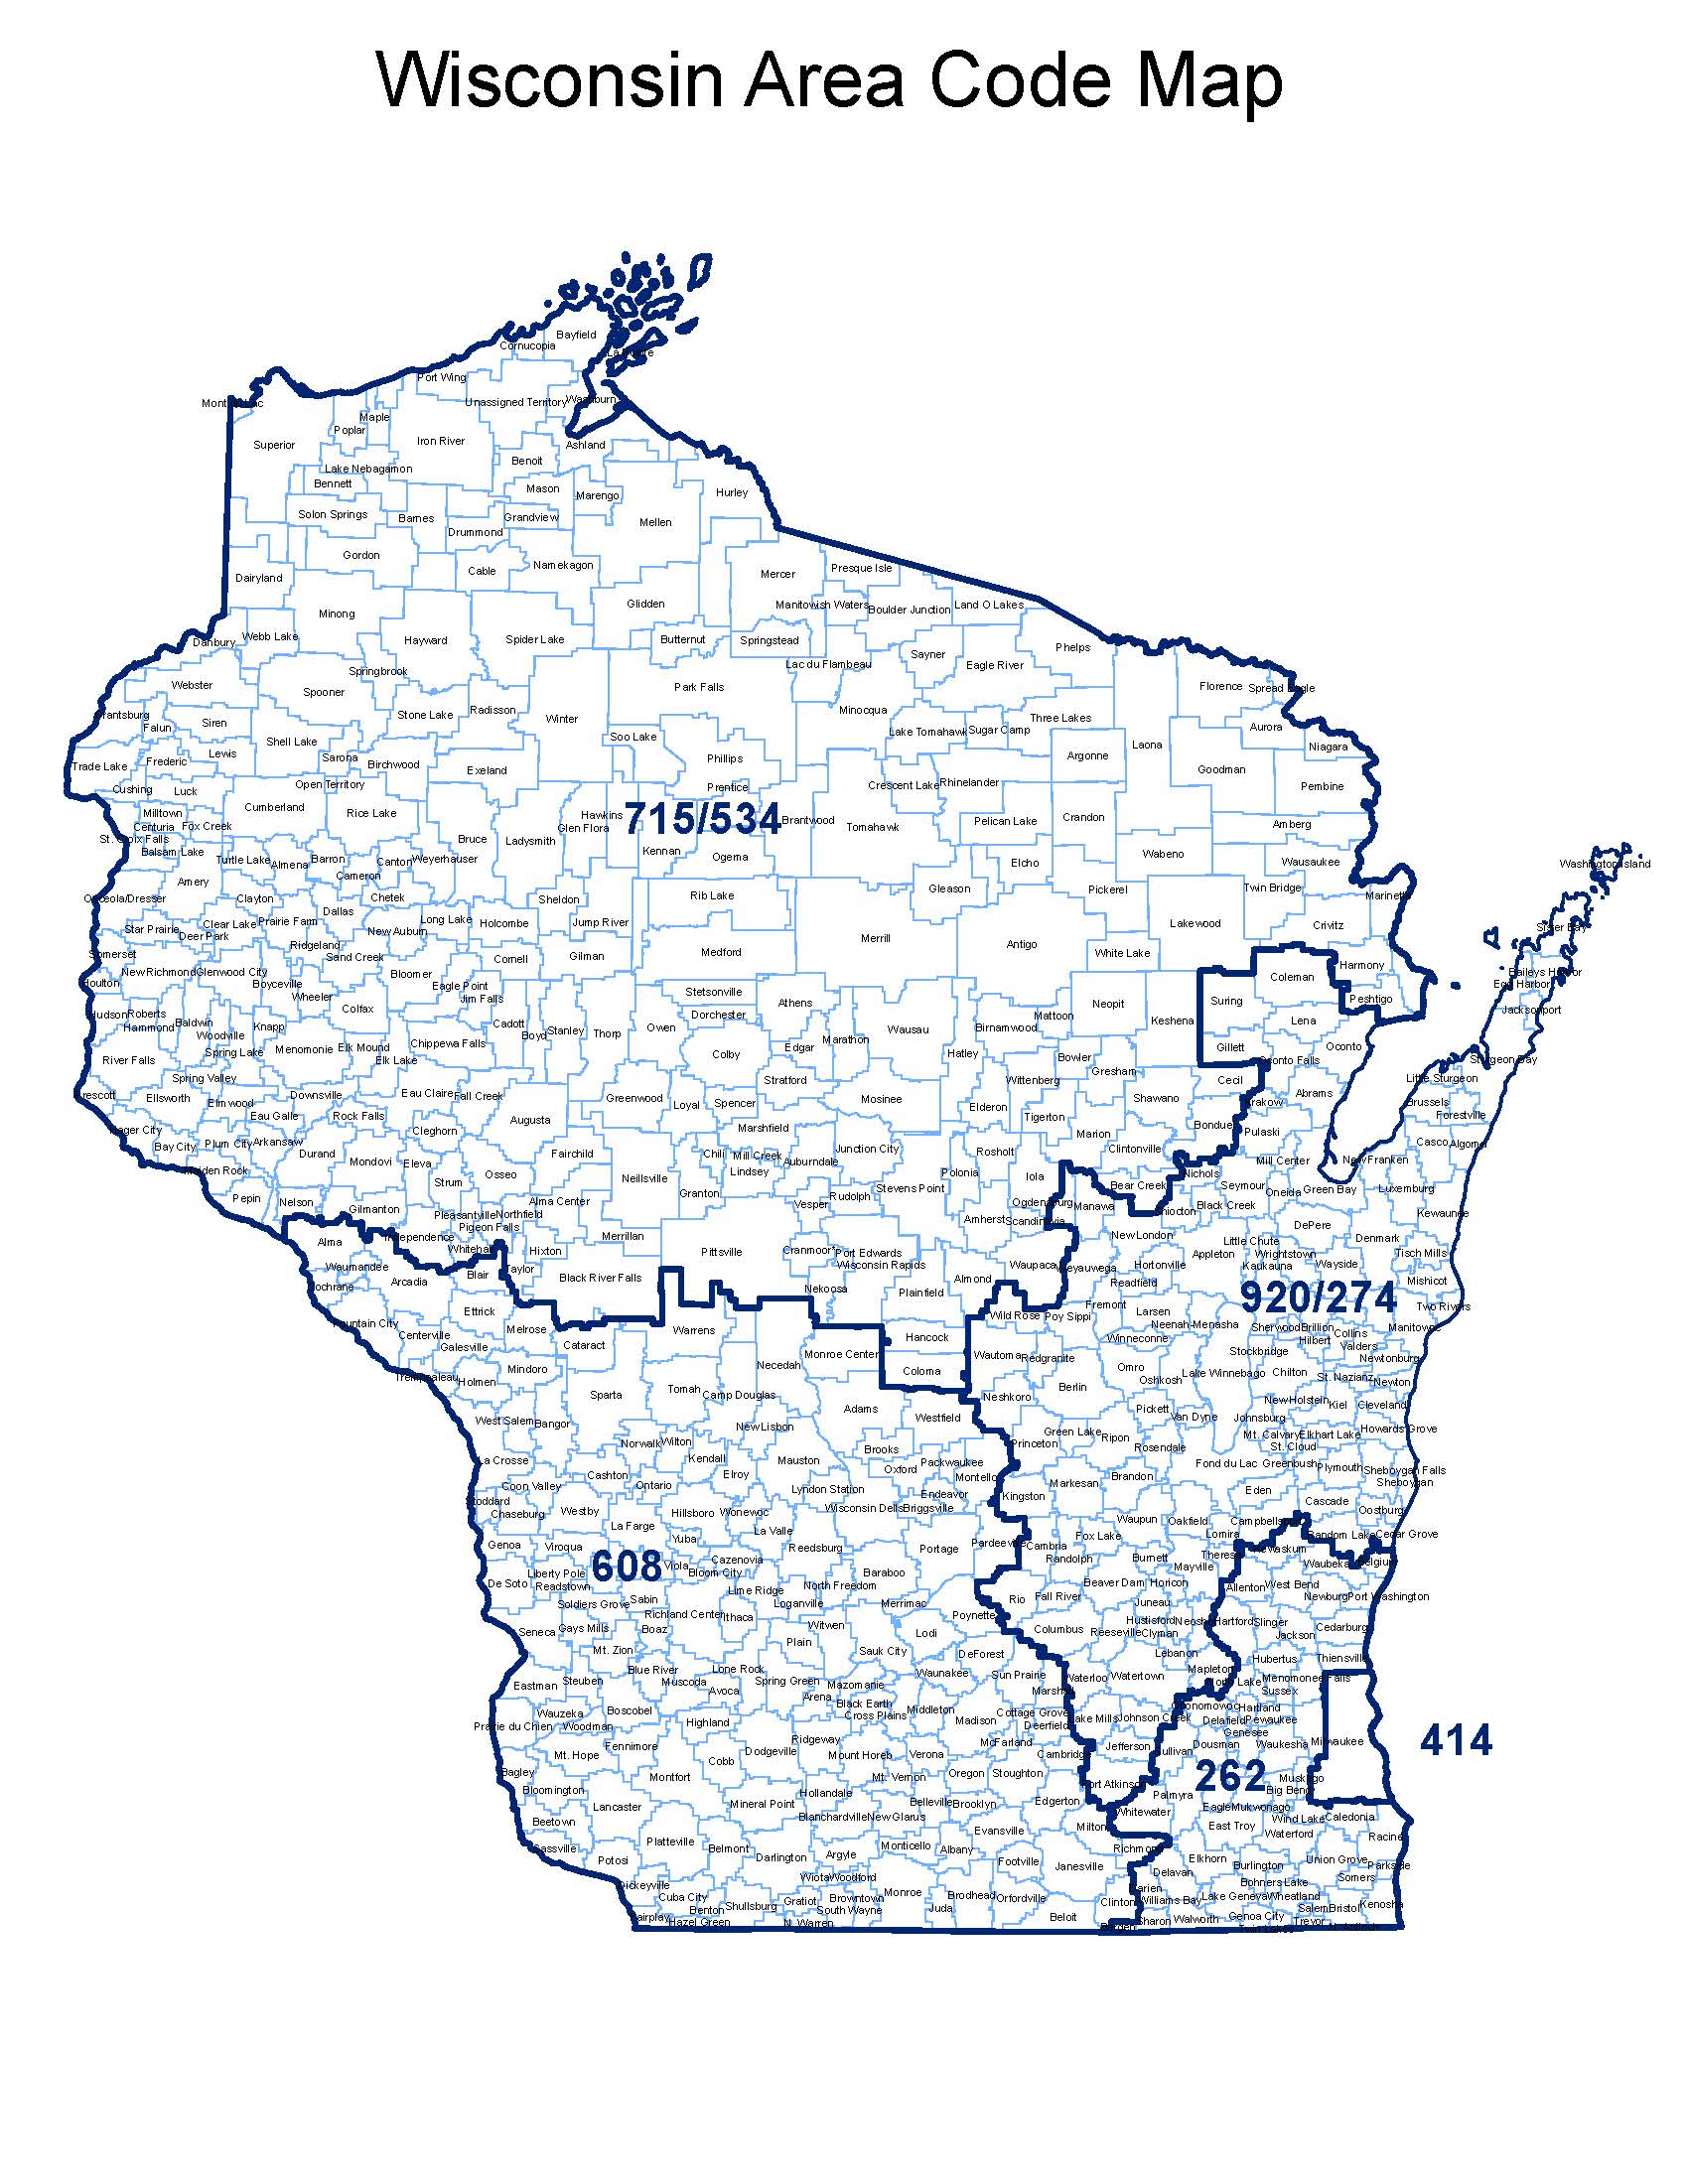 A map of Wisconsin area codes